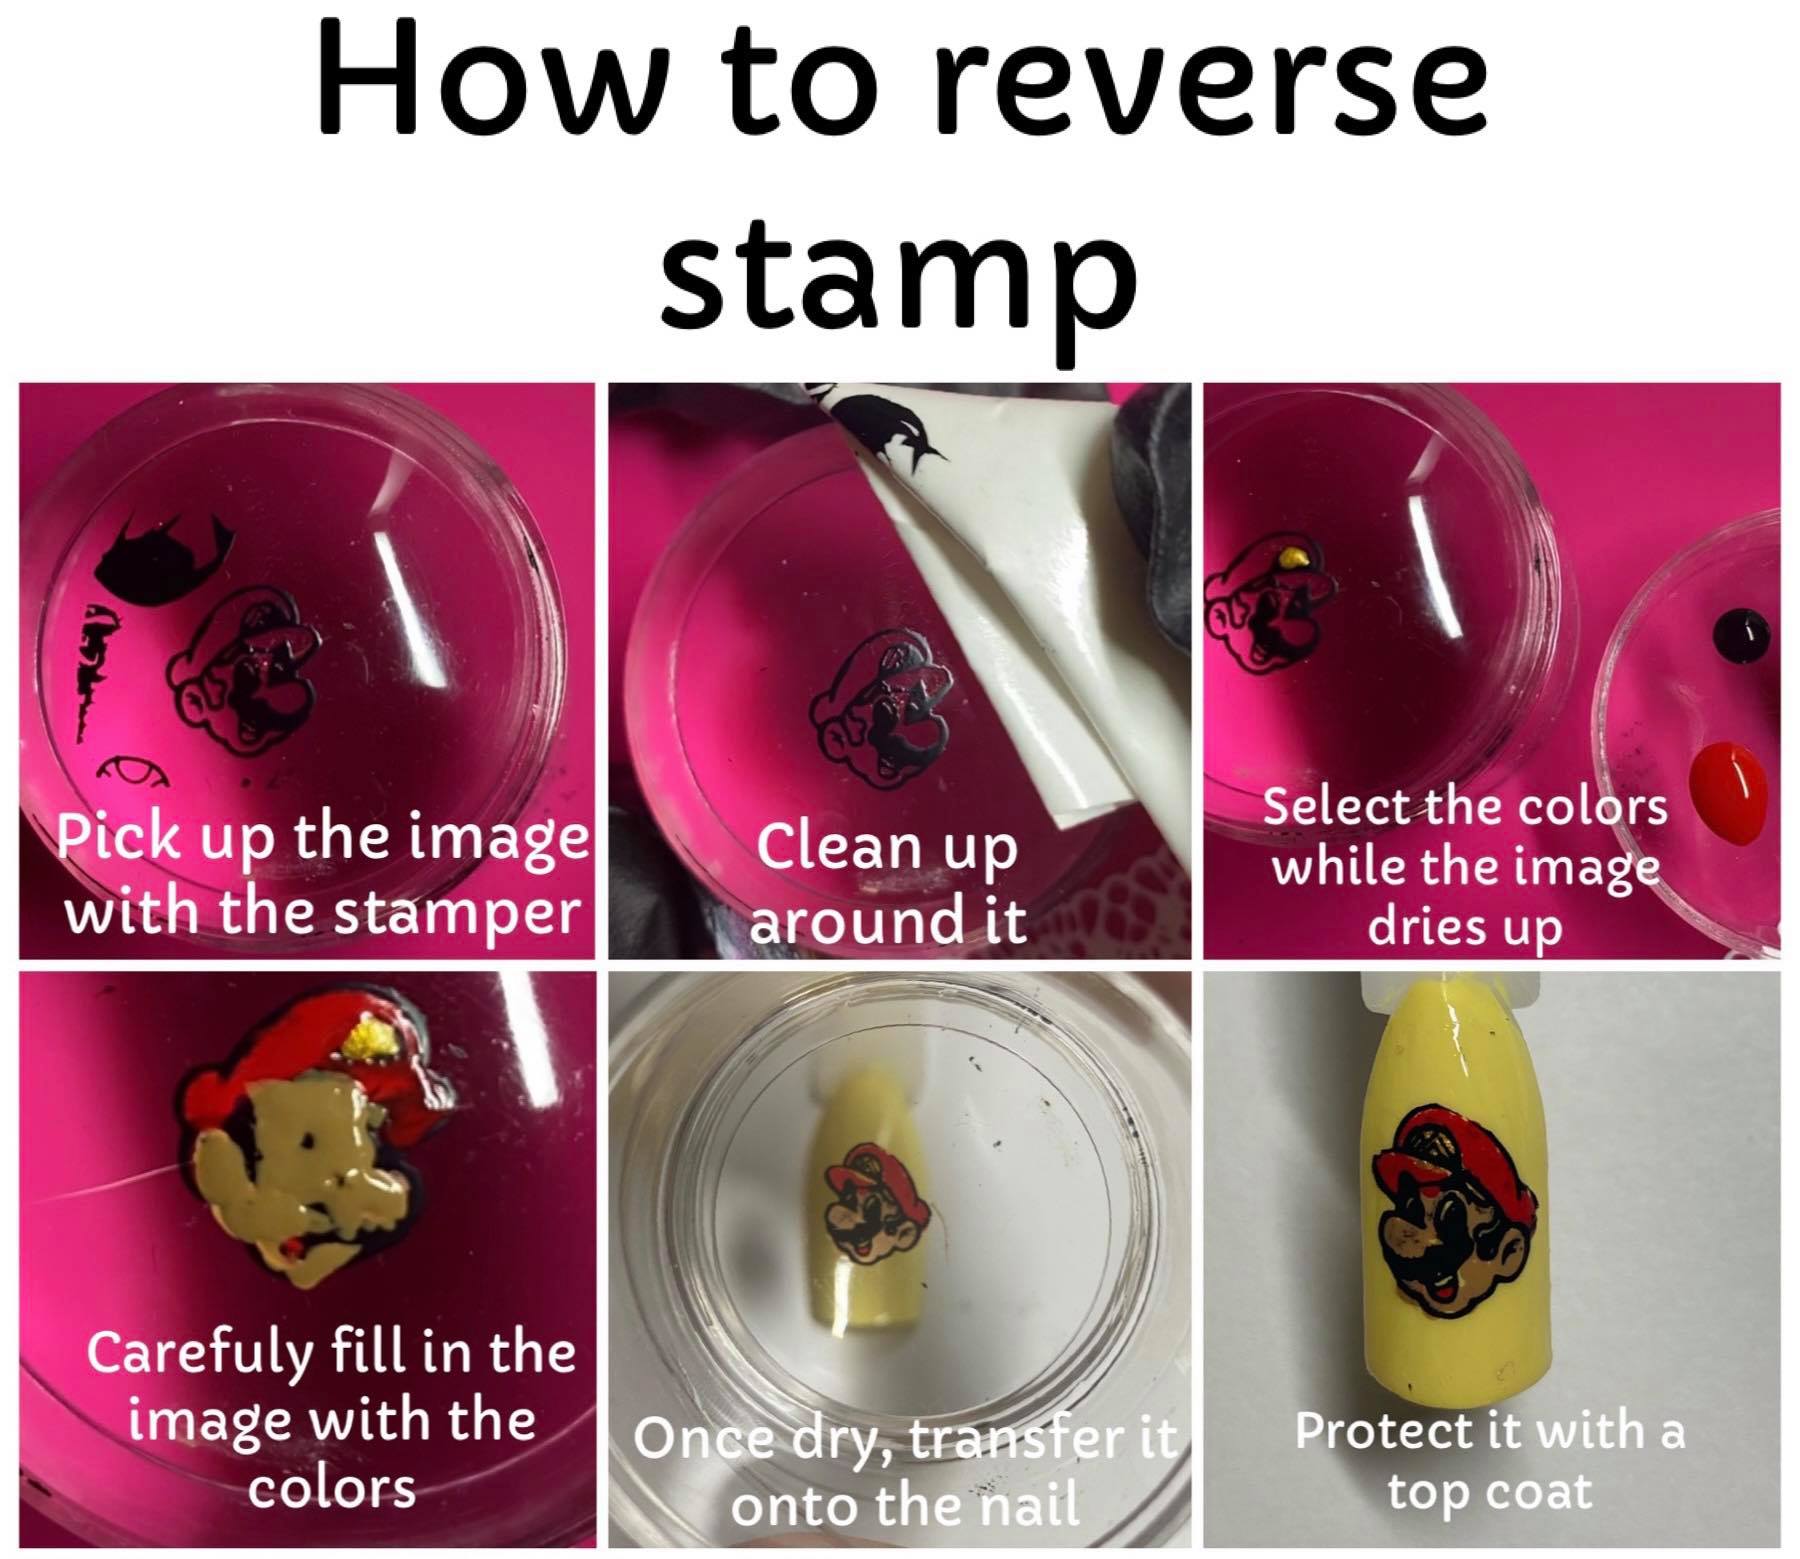 Reverse Stamping Instructions